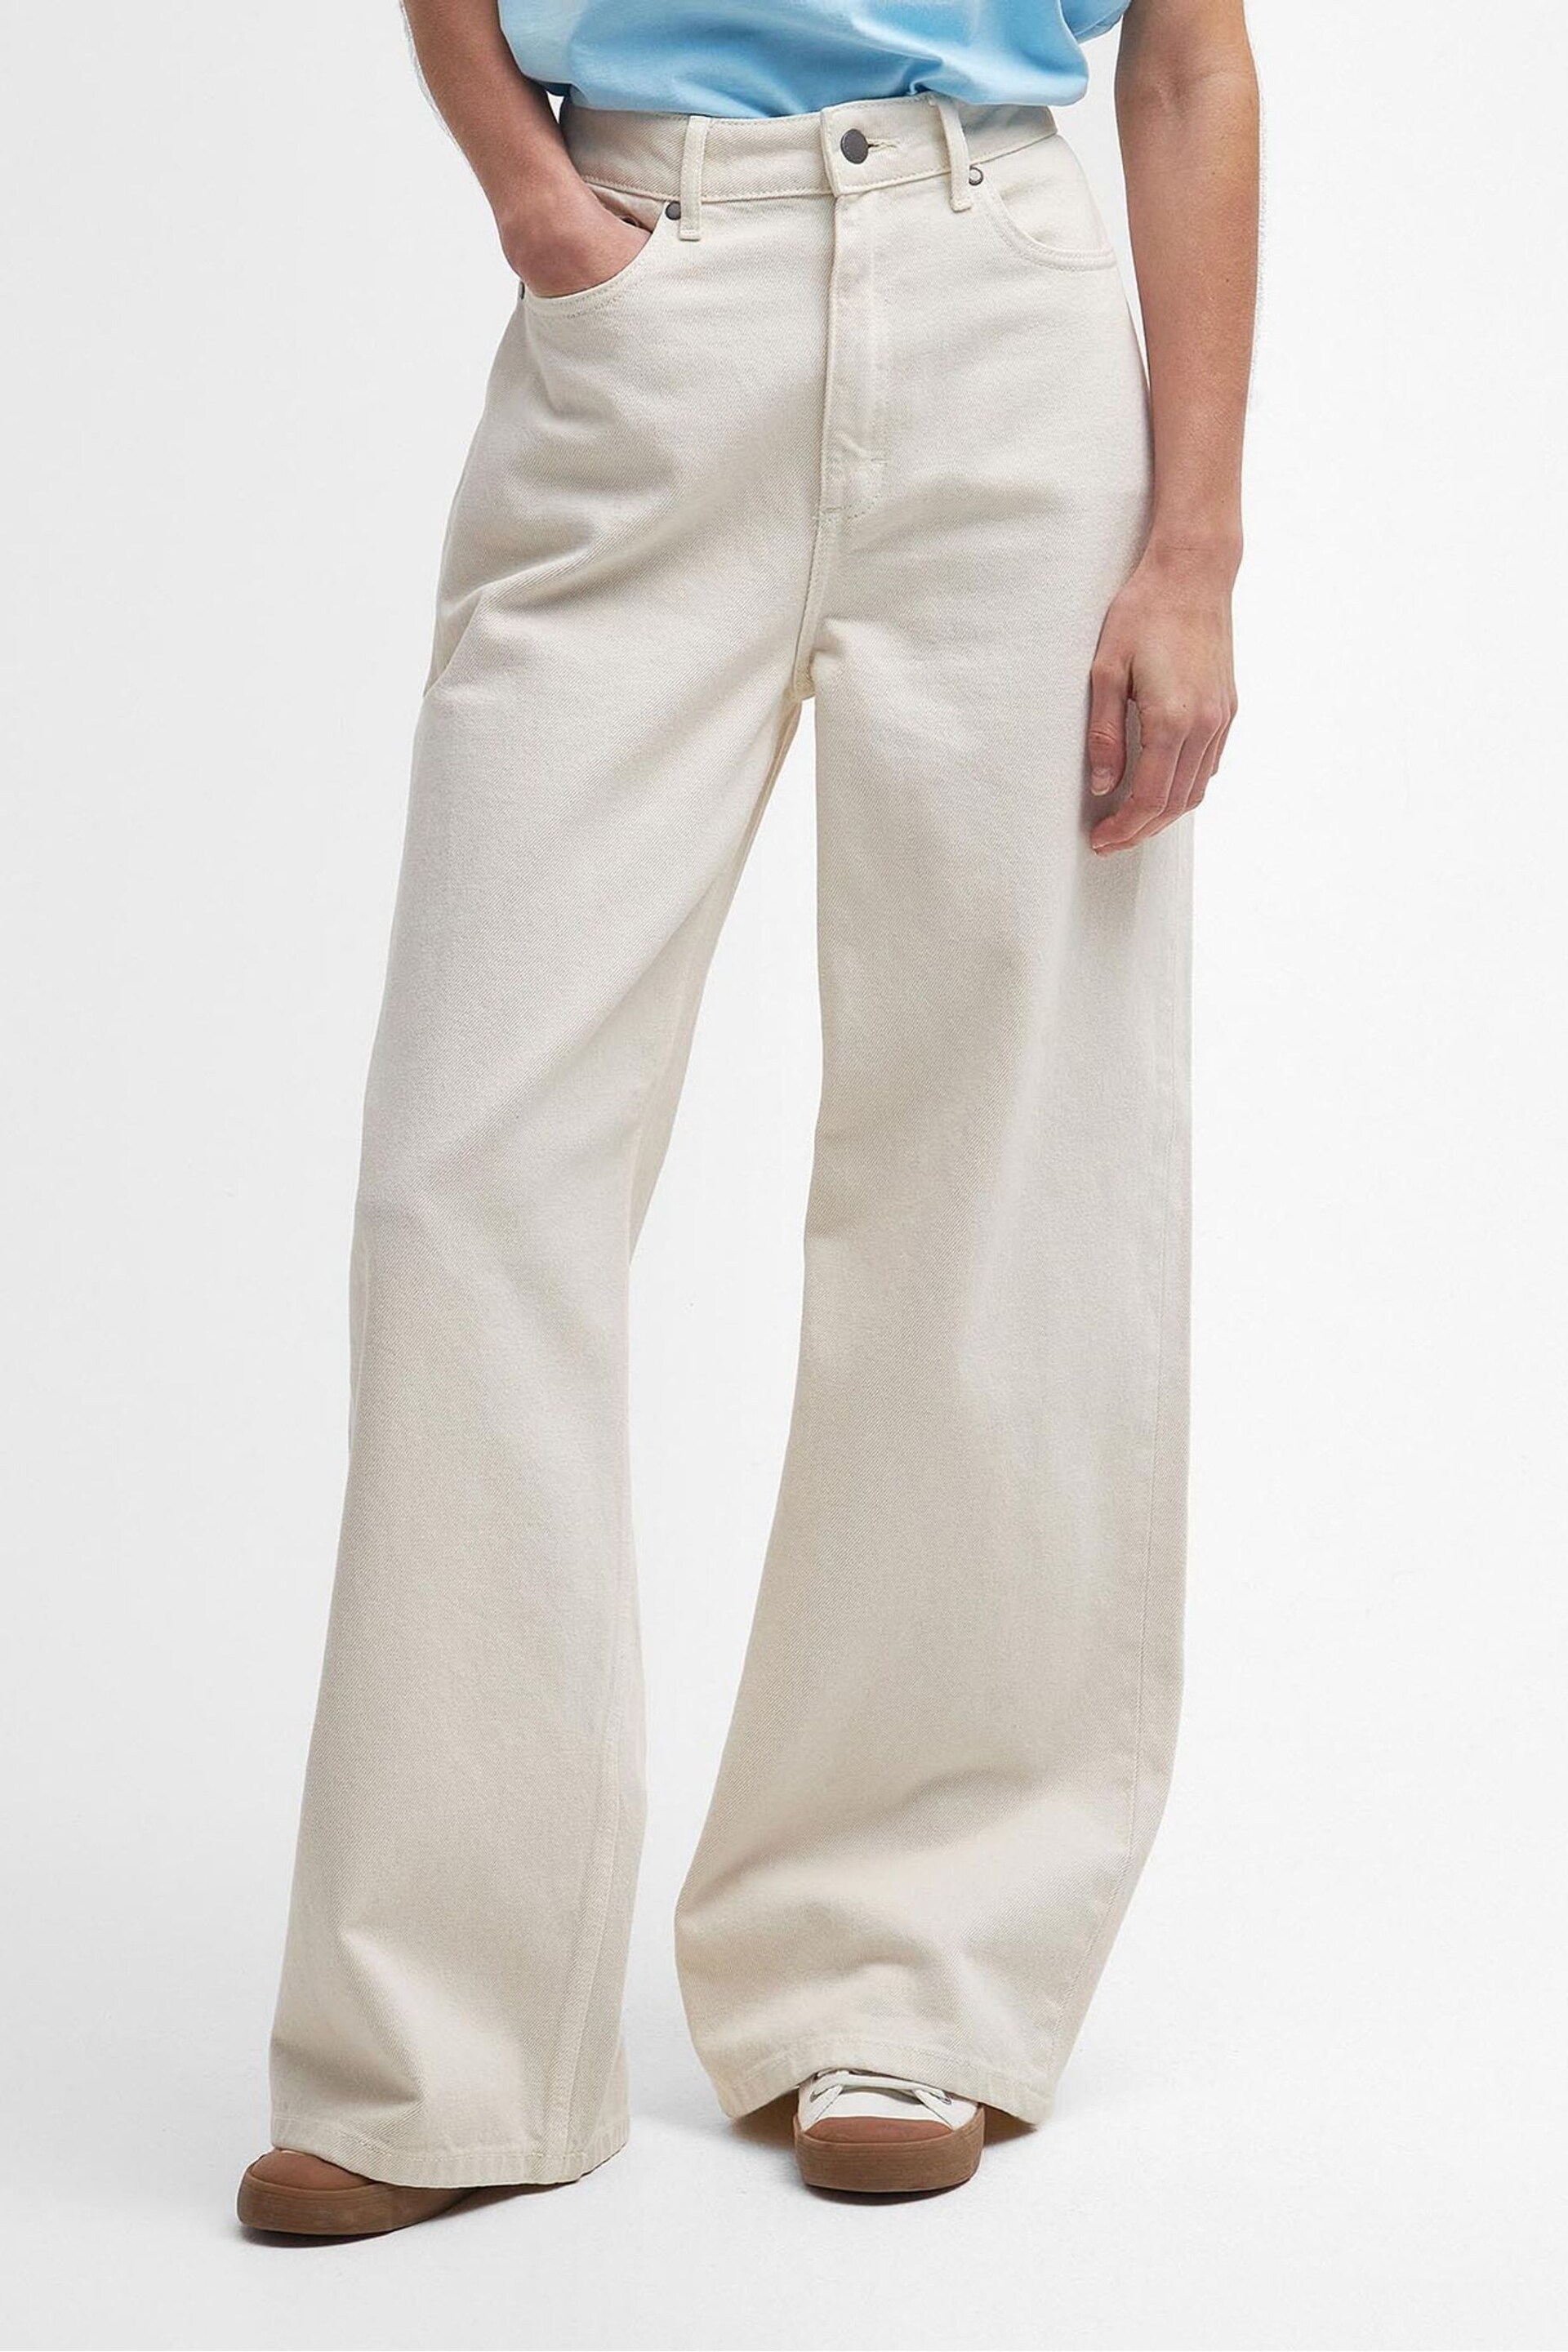 Barbour® Ecru White Maisie Wide Leg Jeans - Image 1 of 5